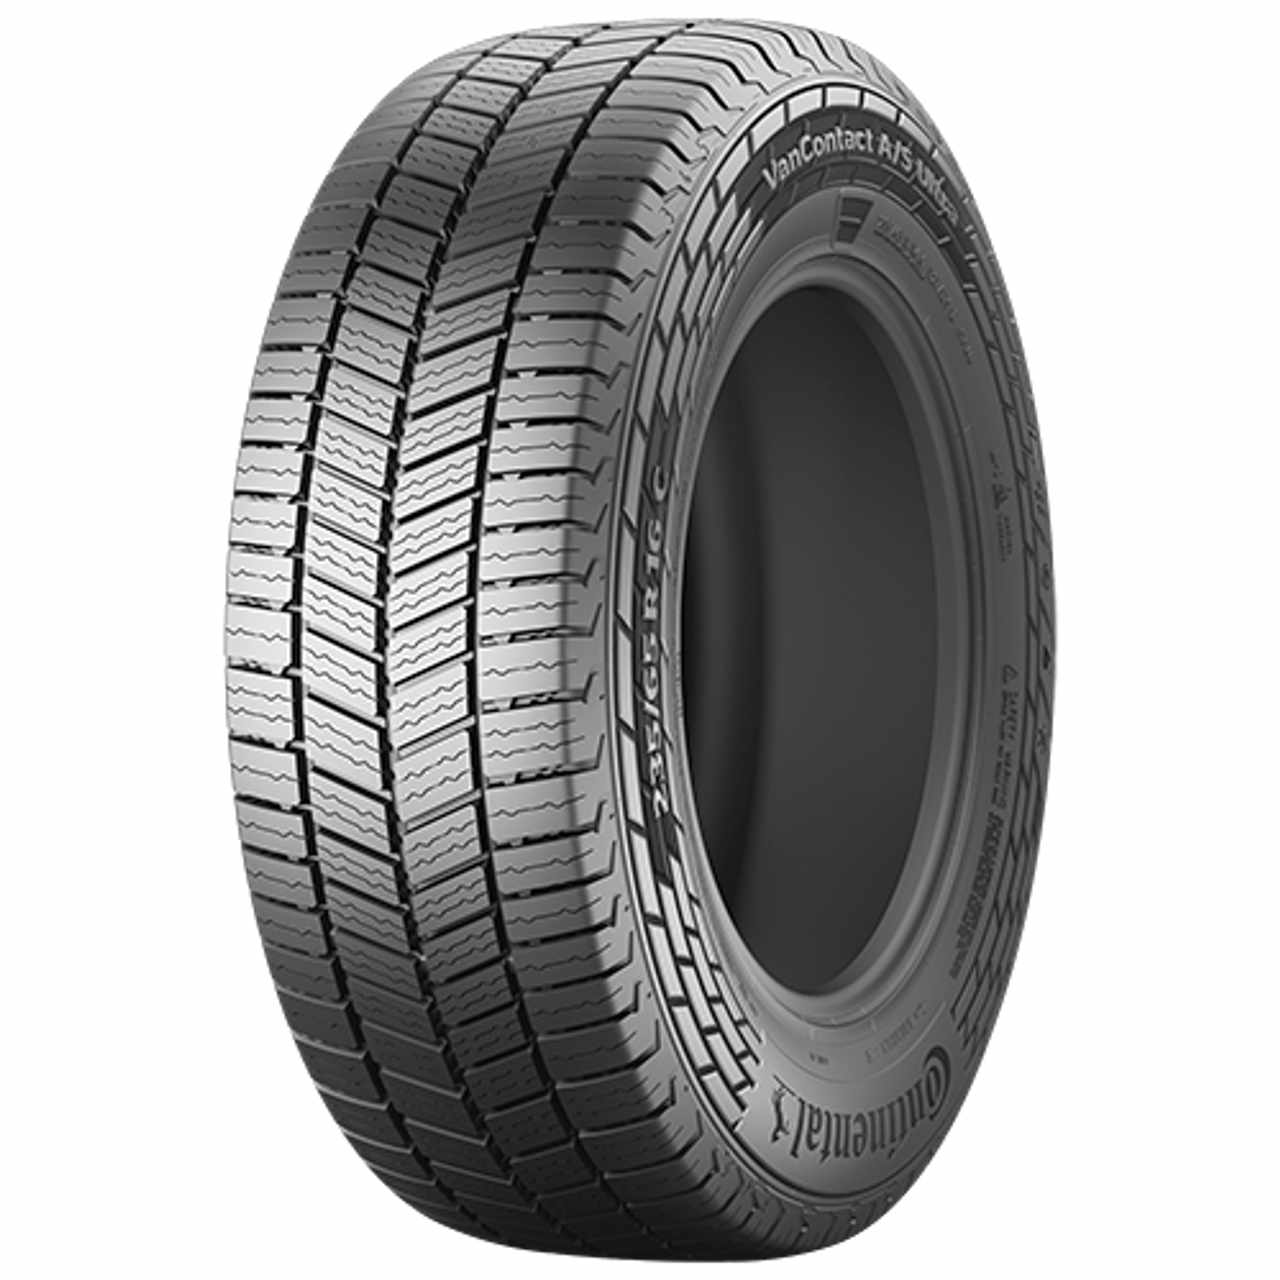 CONTINENTAL VANCONTACT A/S ULTRA 195/65ZR16C 104T BSW von Continental